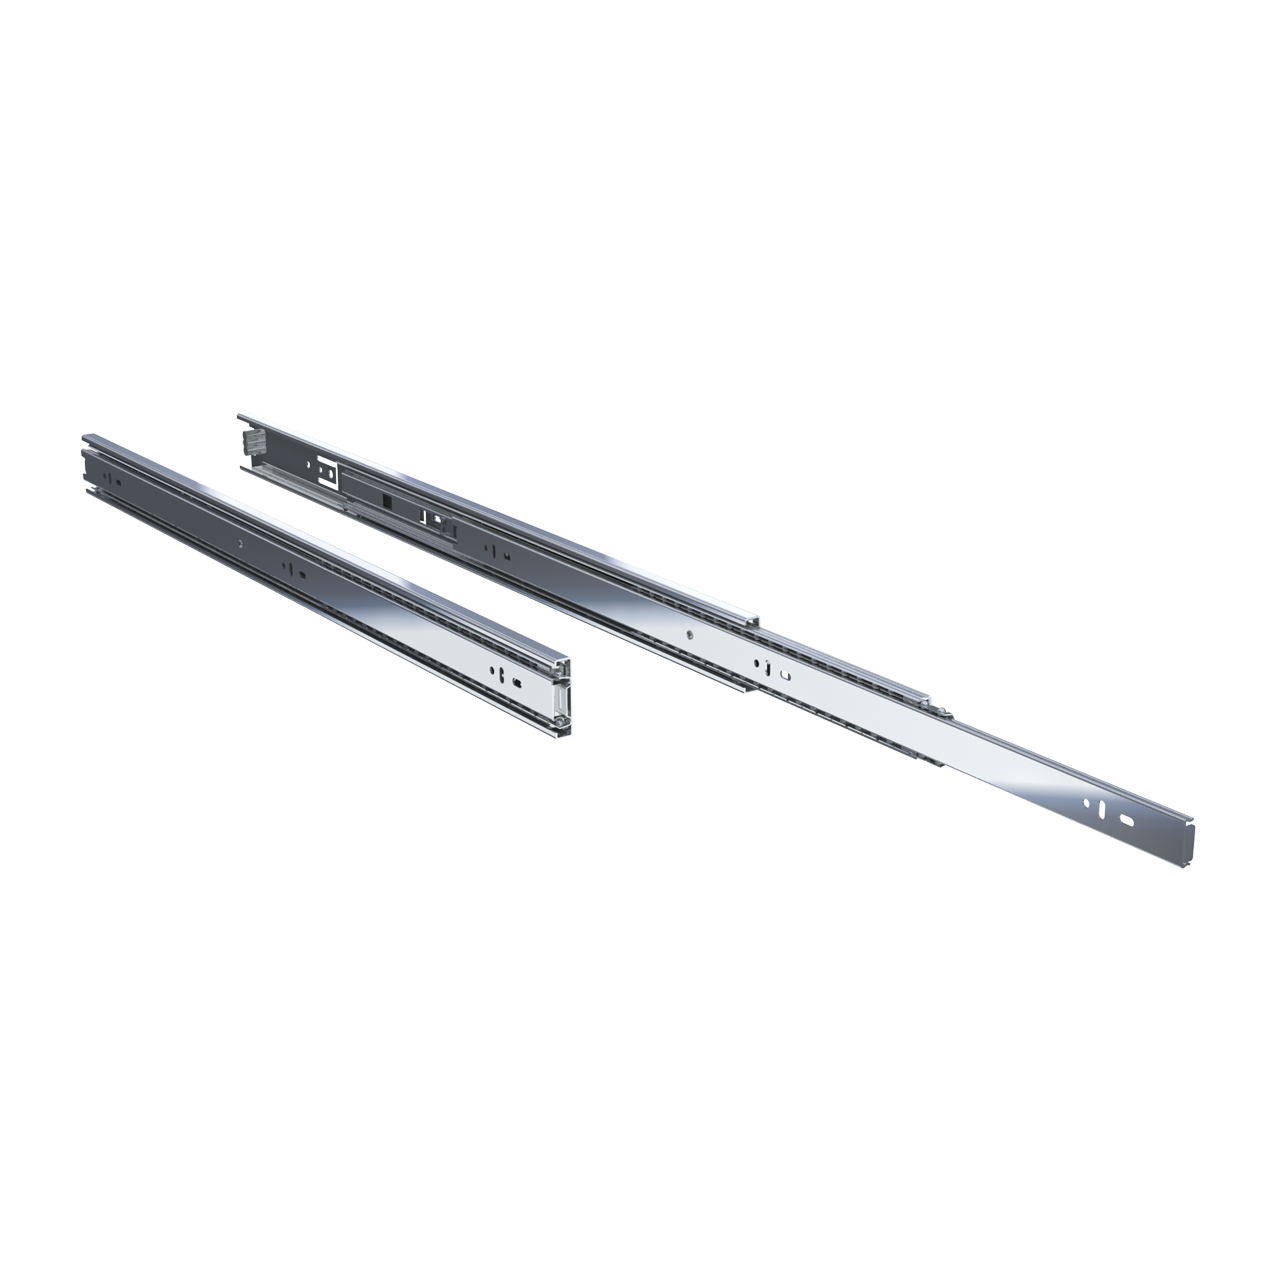 Bulk-buy Drawer Slide Rails Us General Tool Box Accessories Heavy Duty  Drawer Slide for Console Table price comparison